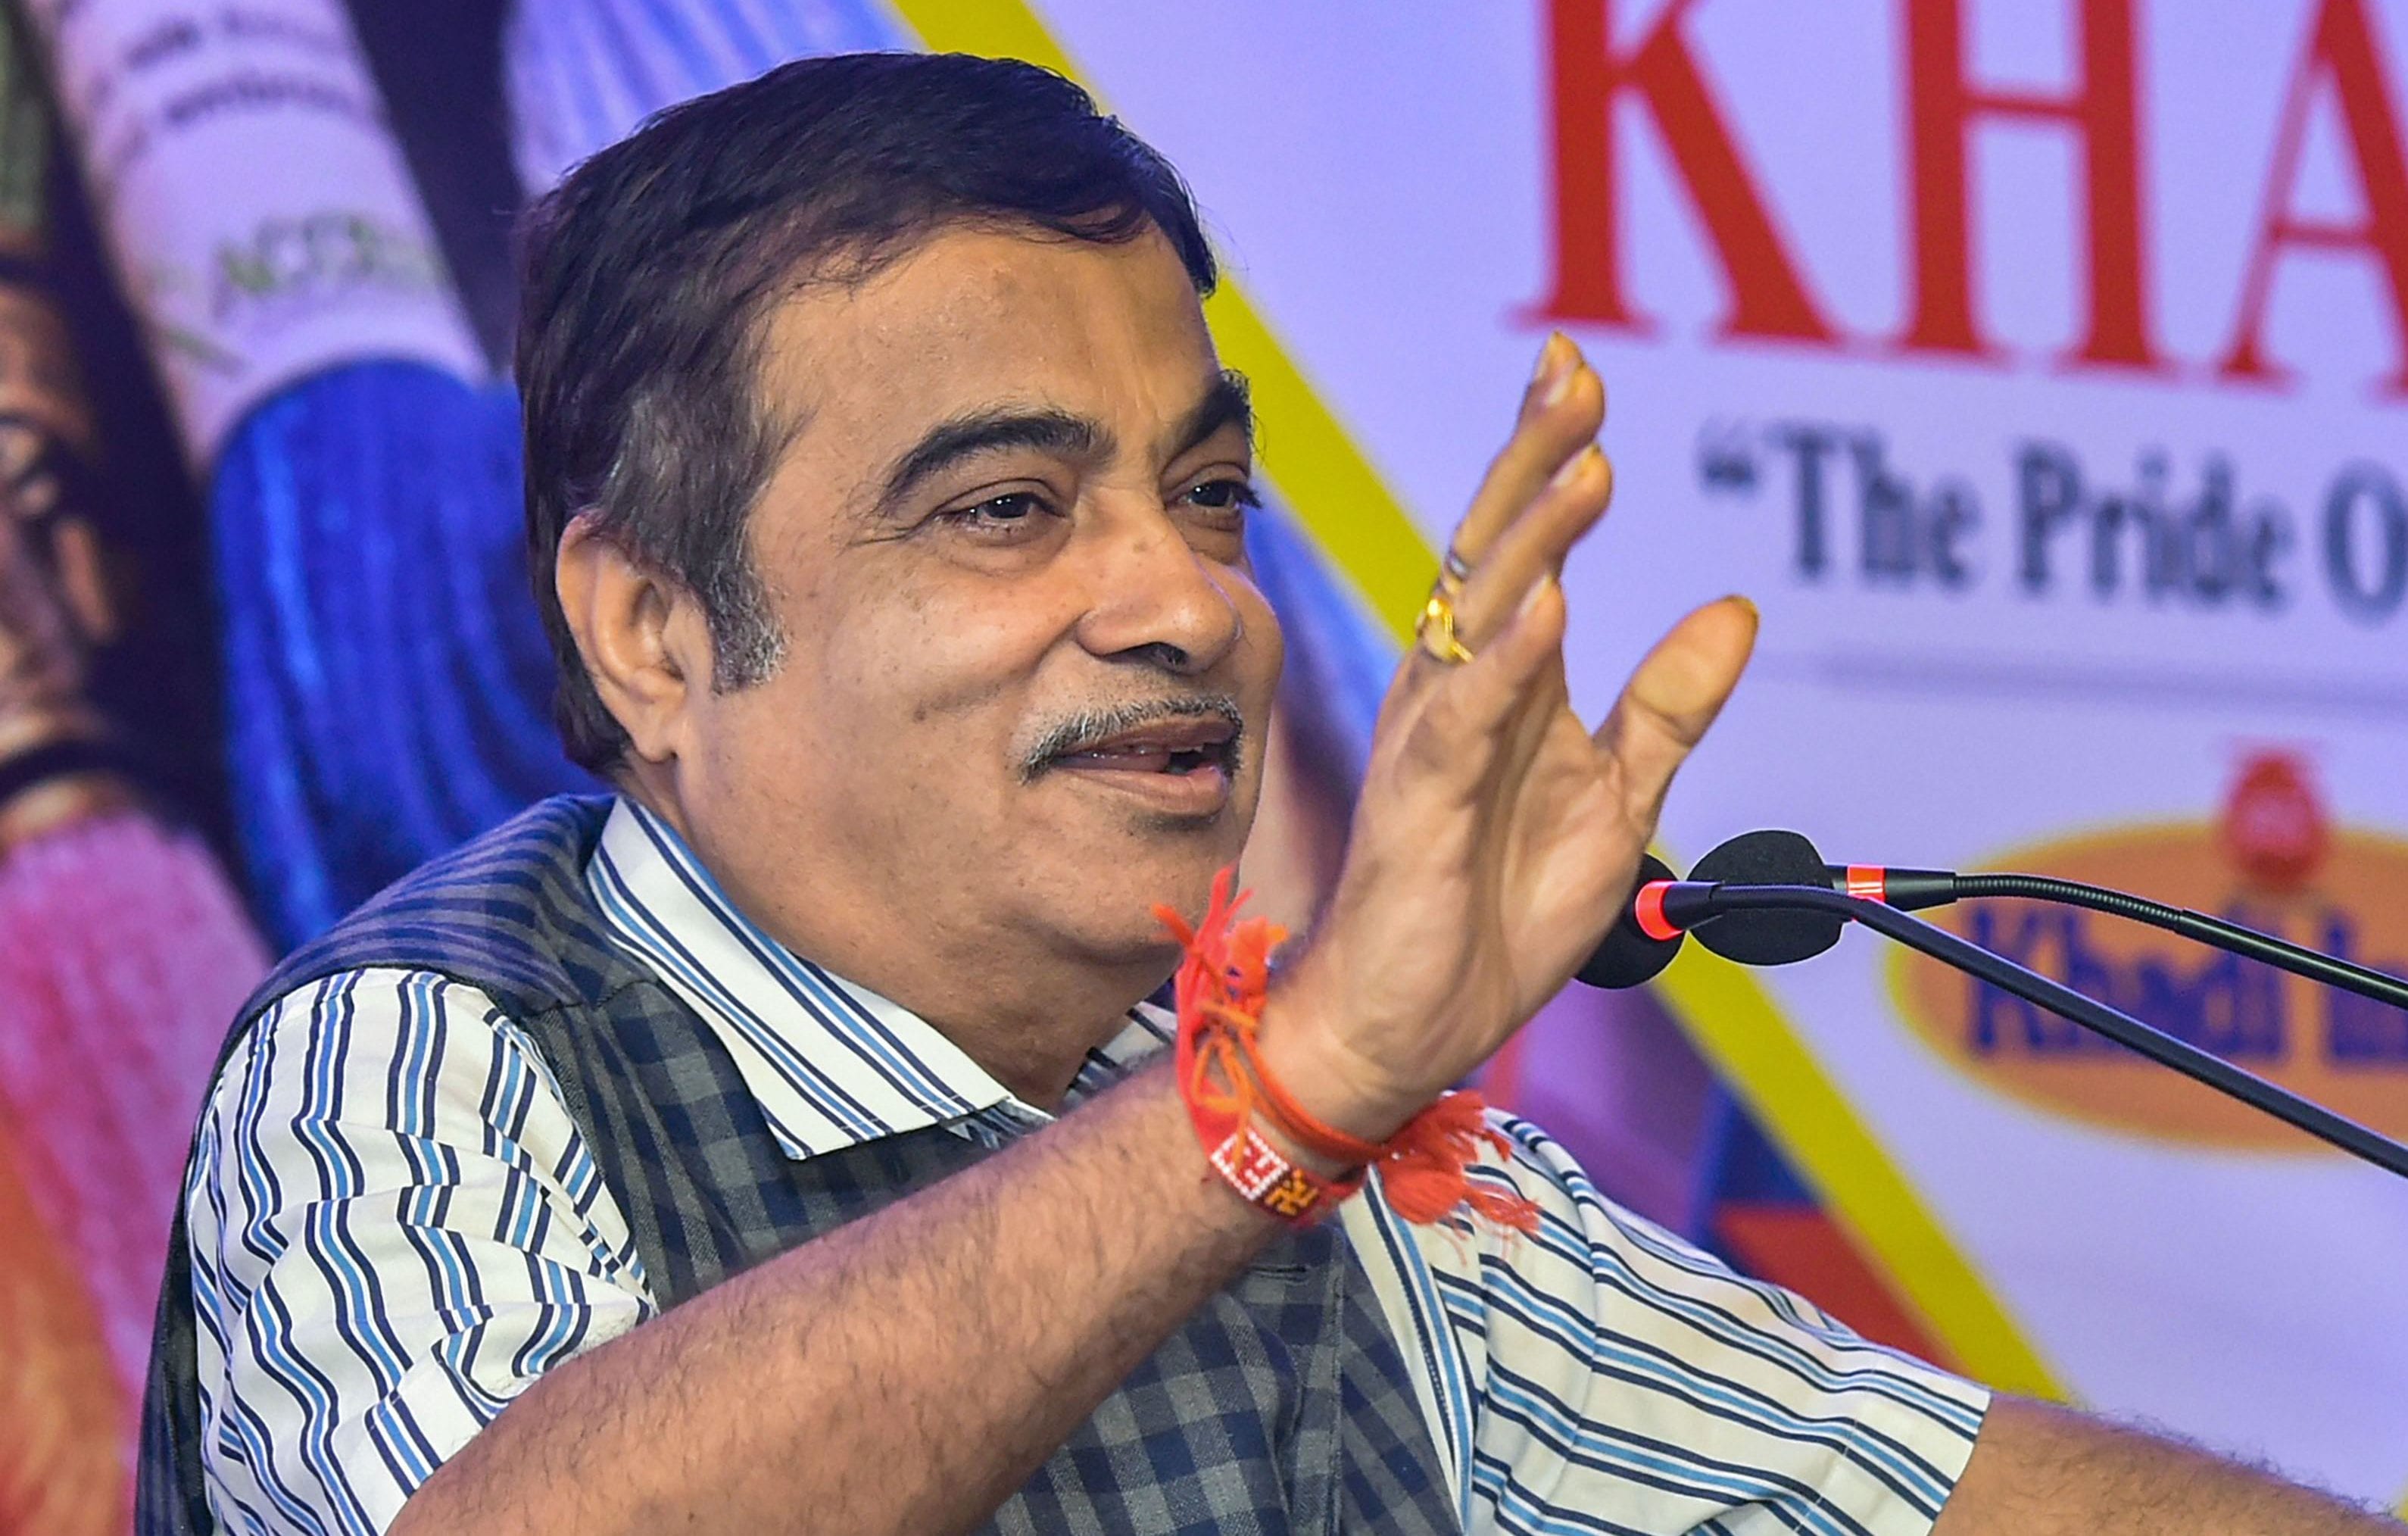 Expect financial package from govt in 2-3 days: Gadkari to industry